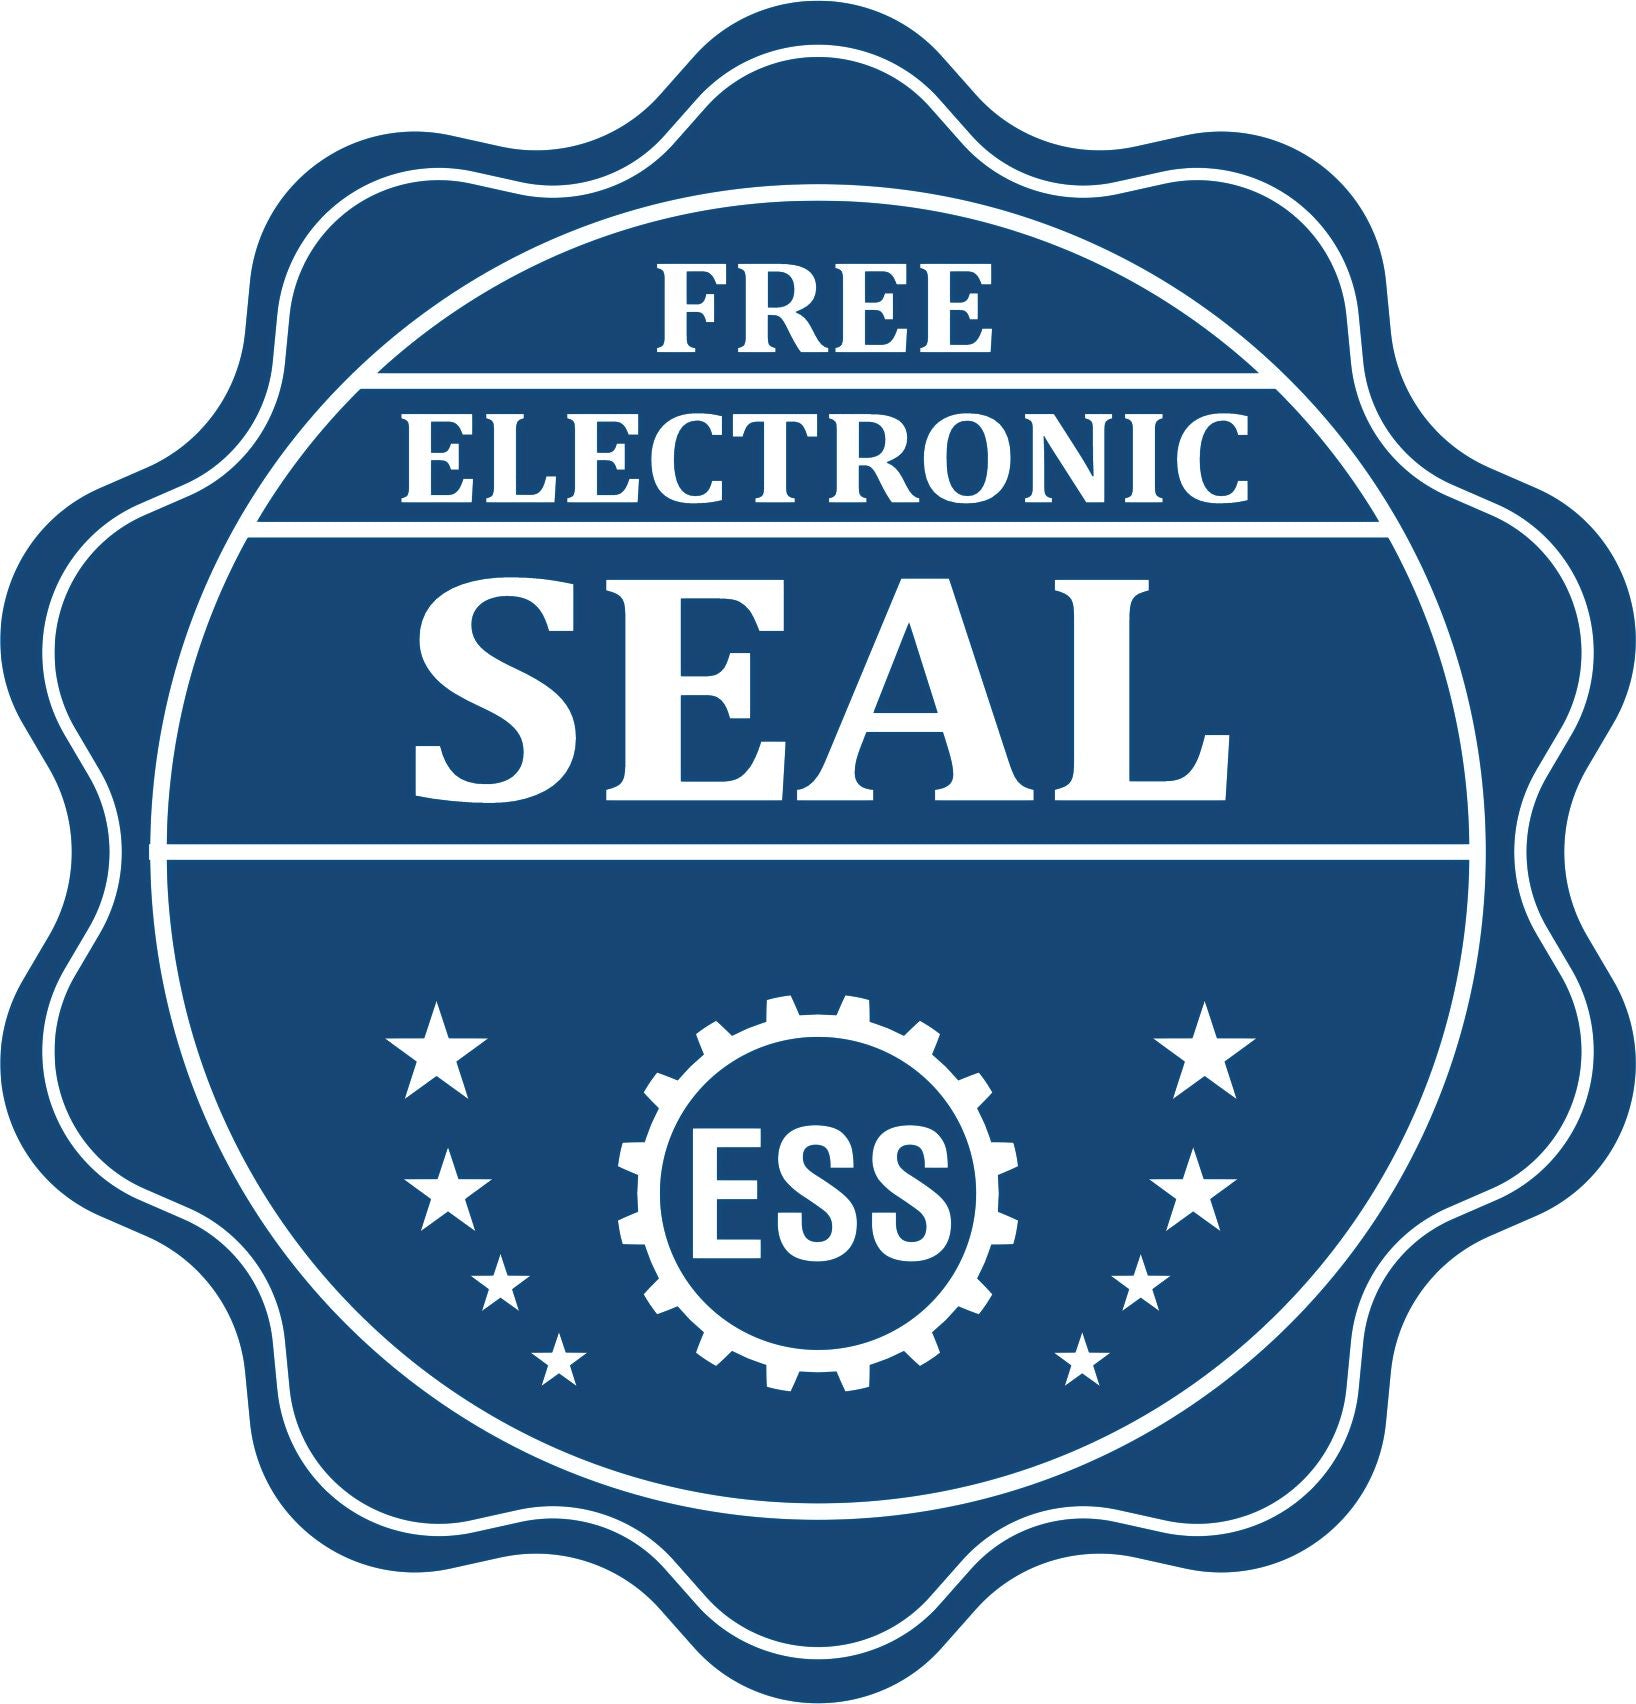 A badge showing a free electronic seal for the Soft Oklahoma Professional Geologist Seal with stars and the ESS gear on the emblem.